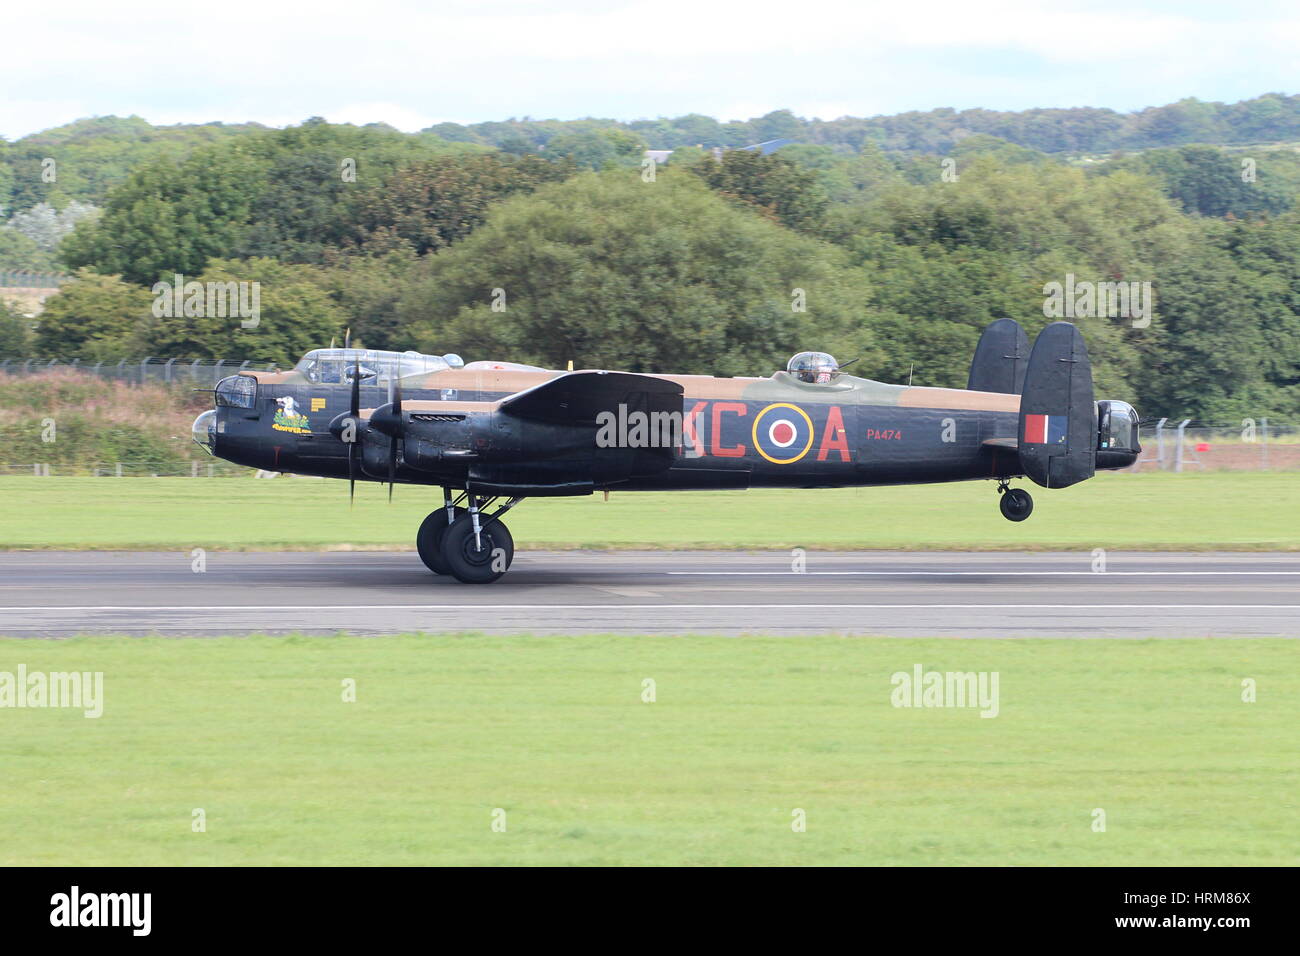 PA474, an Avro Lancaster B1 of the Royal Air Force's Battle of Britain Memorial Flight (BBMF), at Prestwick Airport in Ayrshire. Stock Photo